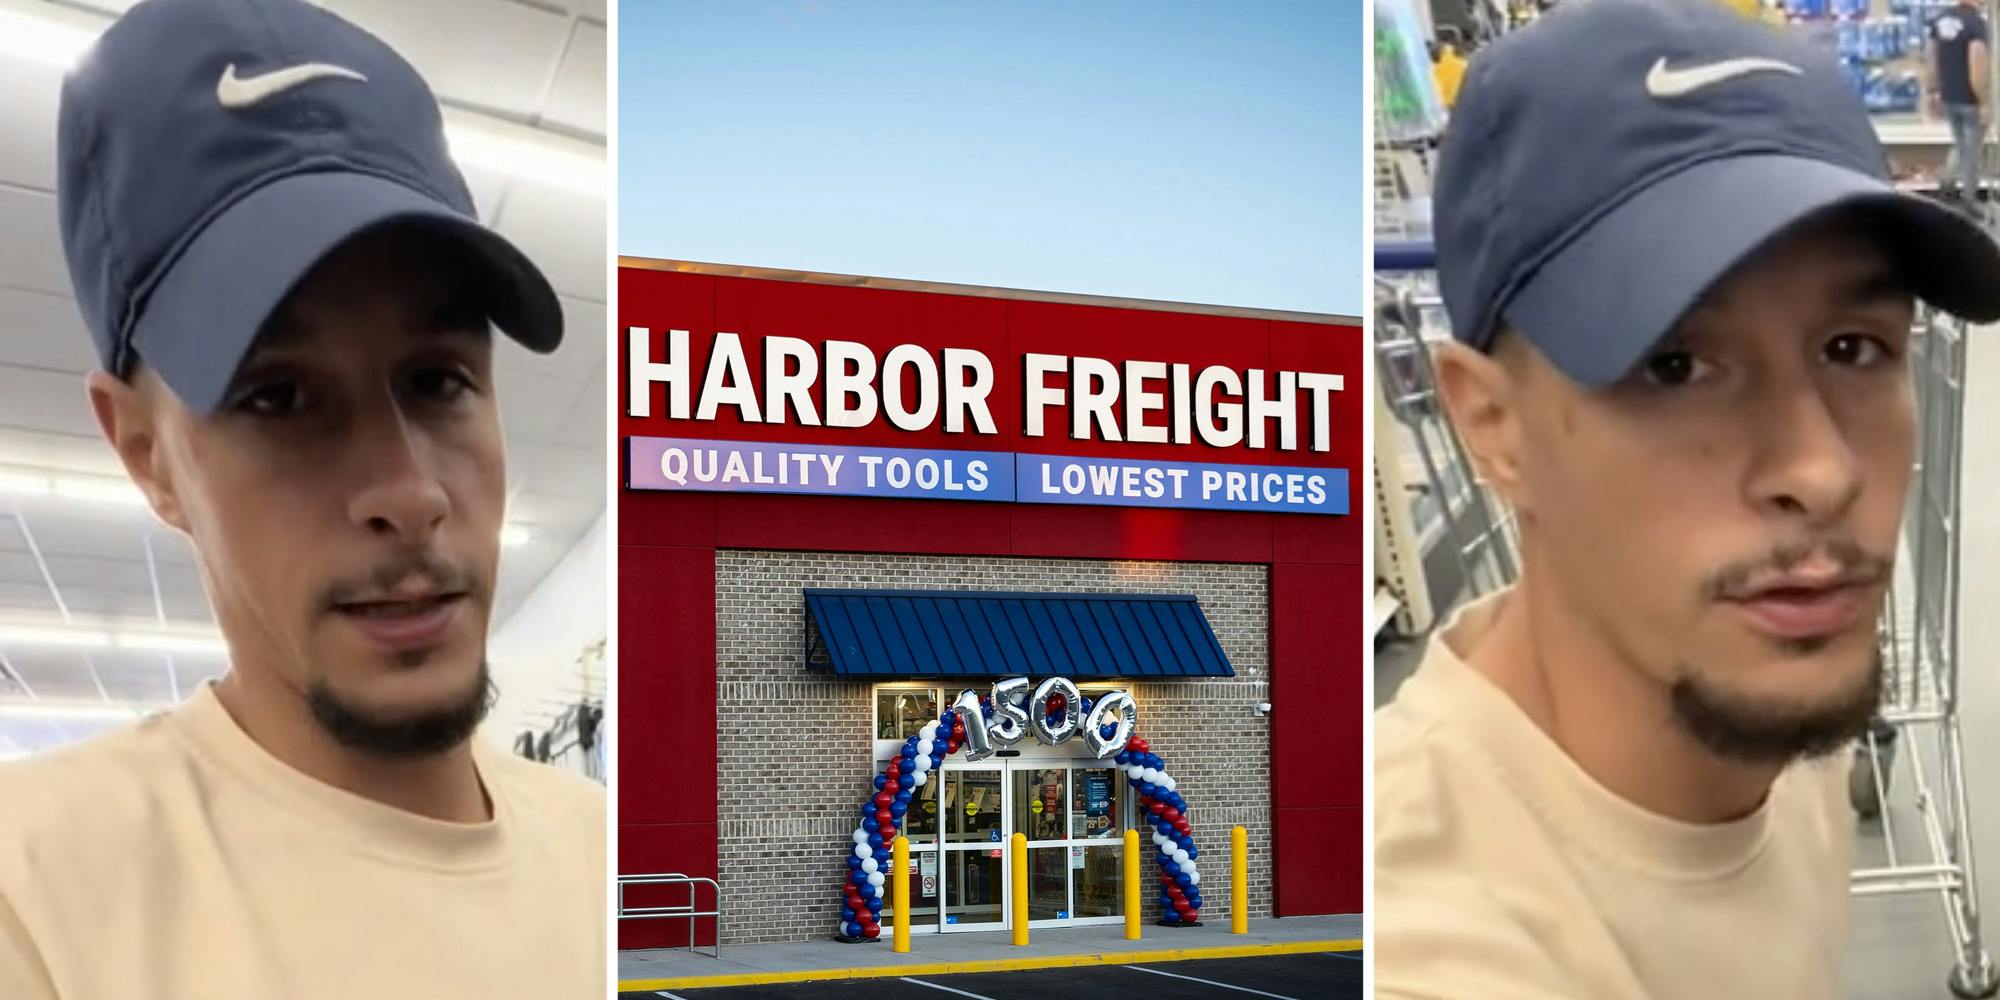 ‘Not me watching this entire video like I’m about to go fix some stuff’: Mechanic shows which tools you can buy at Harbor Freight to cover most of your at-home car fixes